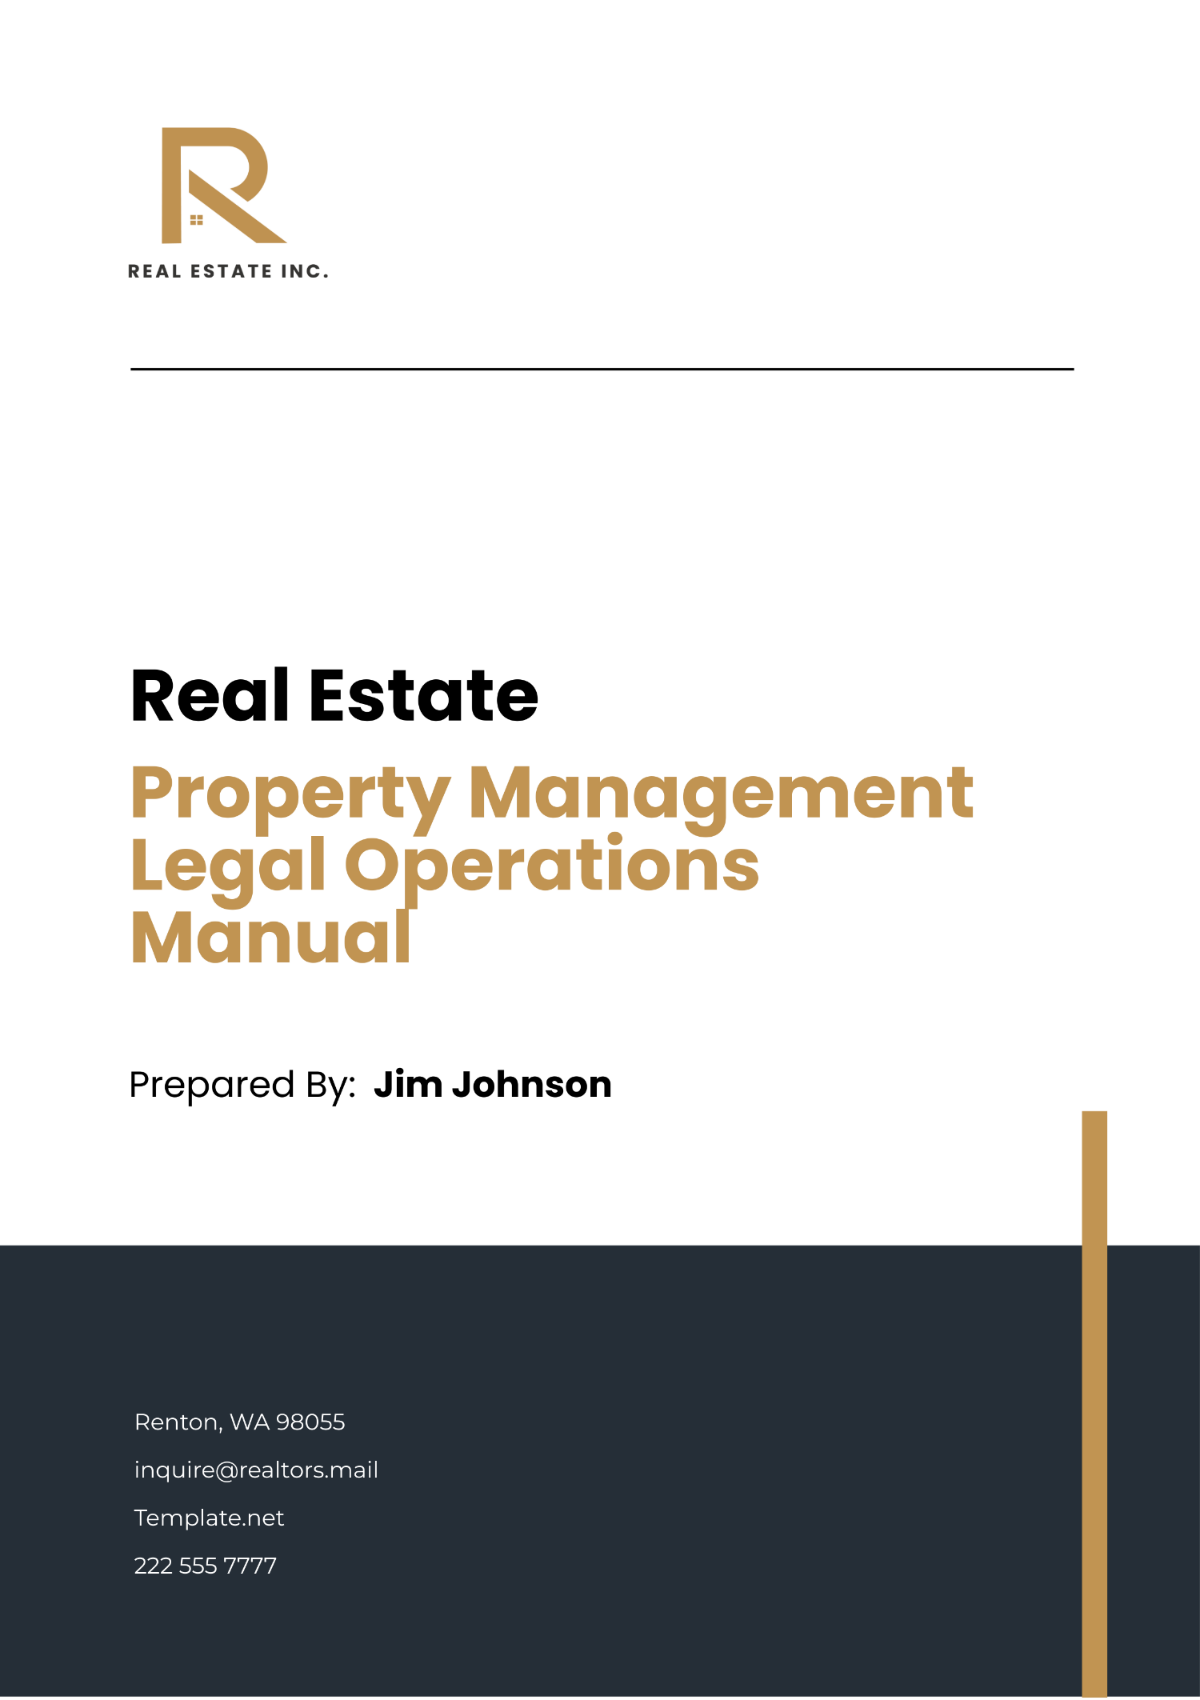 Real Estate Property Management Legal Operations Manual Template